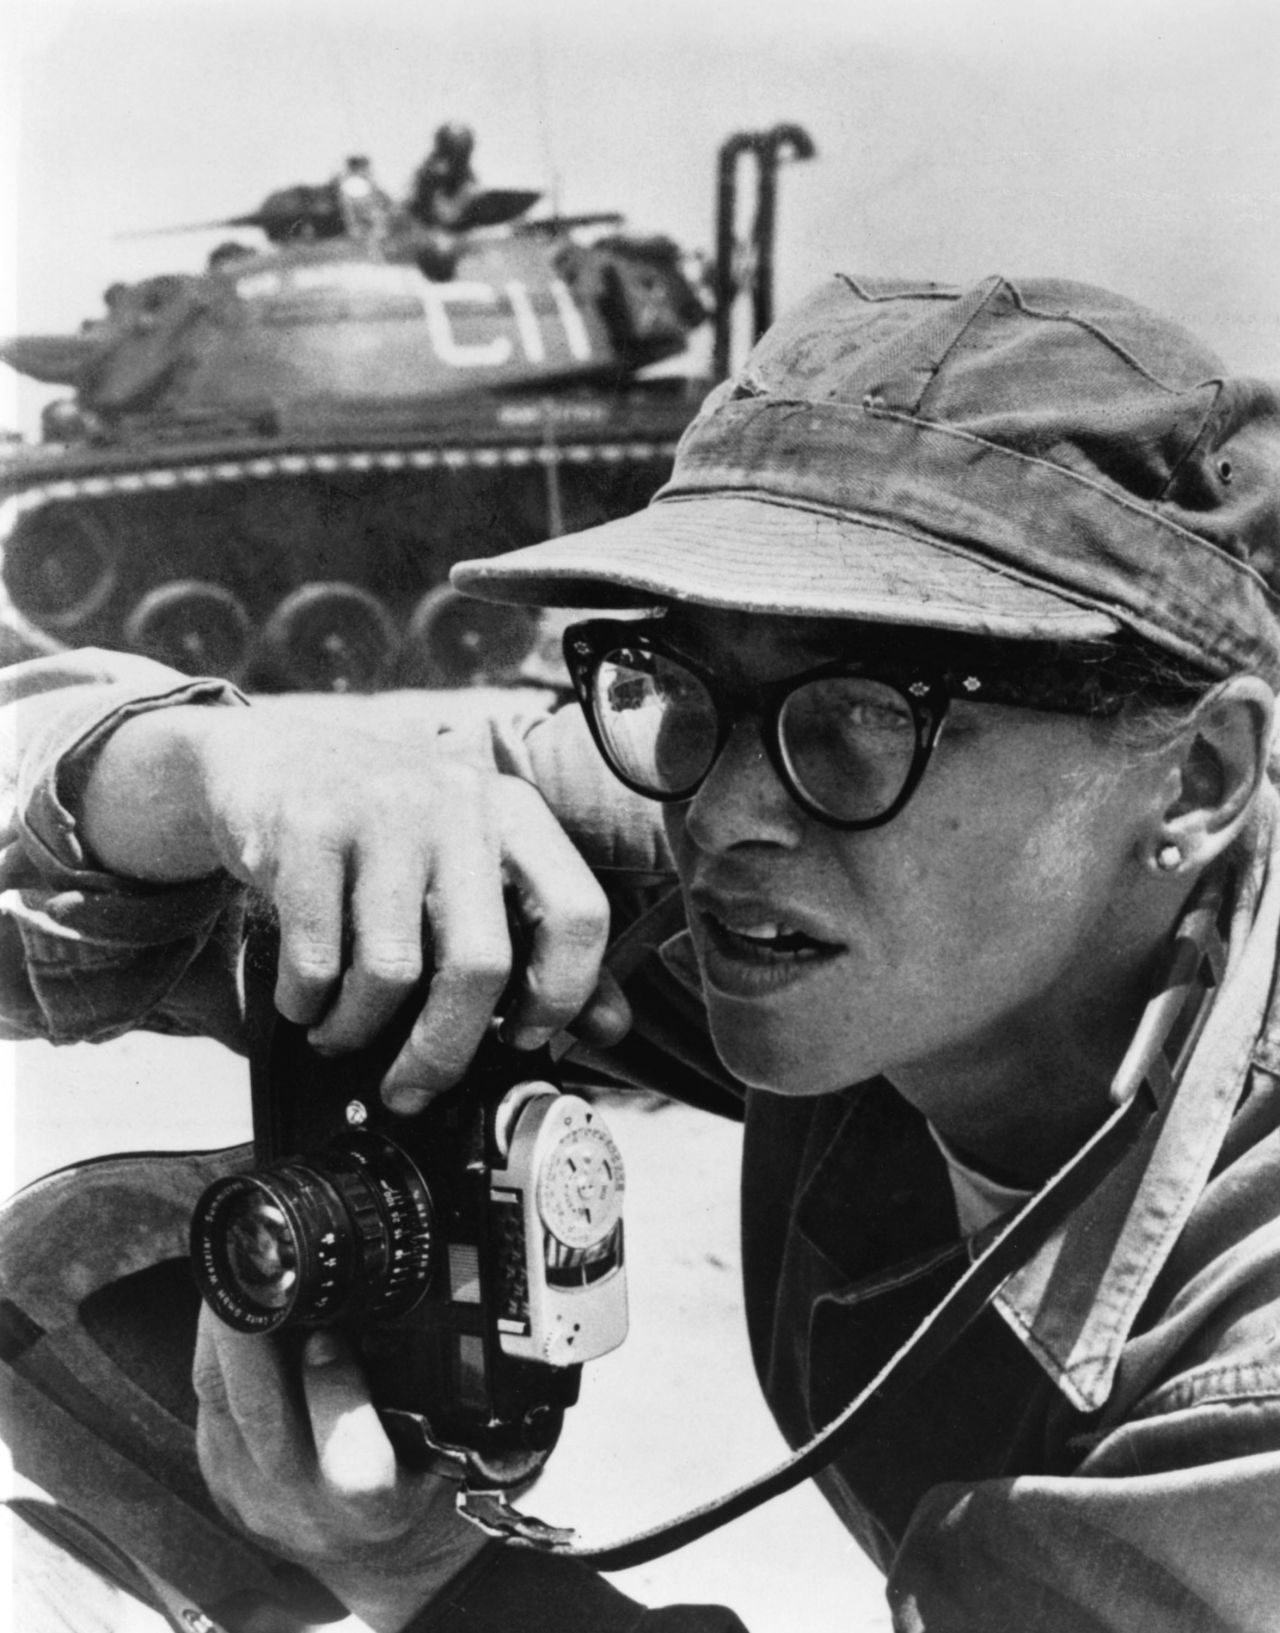 Dickey Chapelle was a war correspondent who traveled across the world covering various conflicts. During World War II, she was embedded with US Marines during the battle of Iwo Jima. She also covered the battle of Okinawa. Chapelle was covering the Vietnam War in 1965 when she was killed by a landmine. She is the first American female war correspondent to have been killed in action.